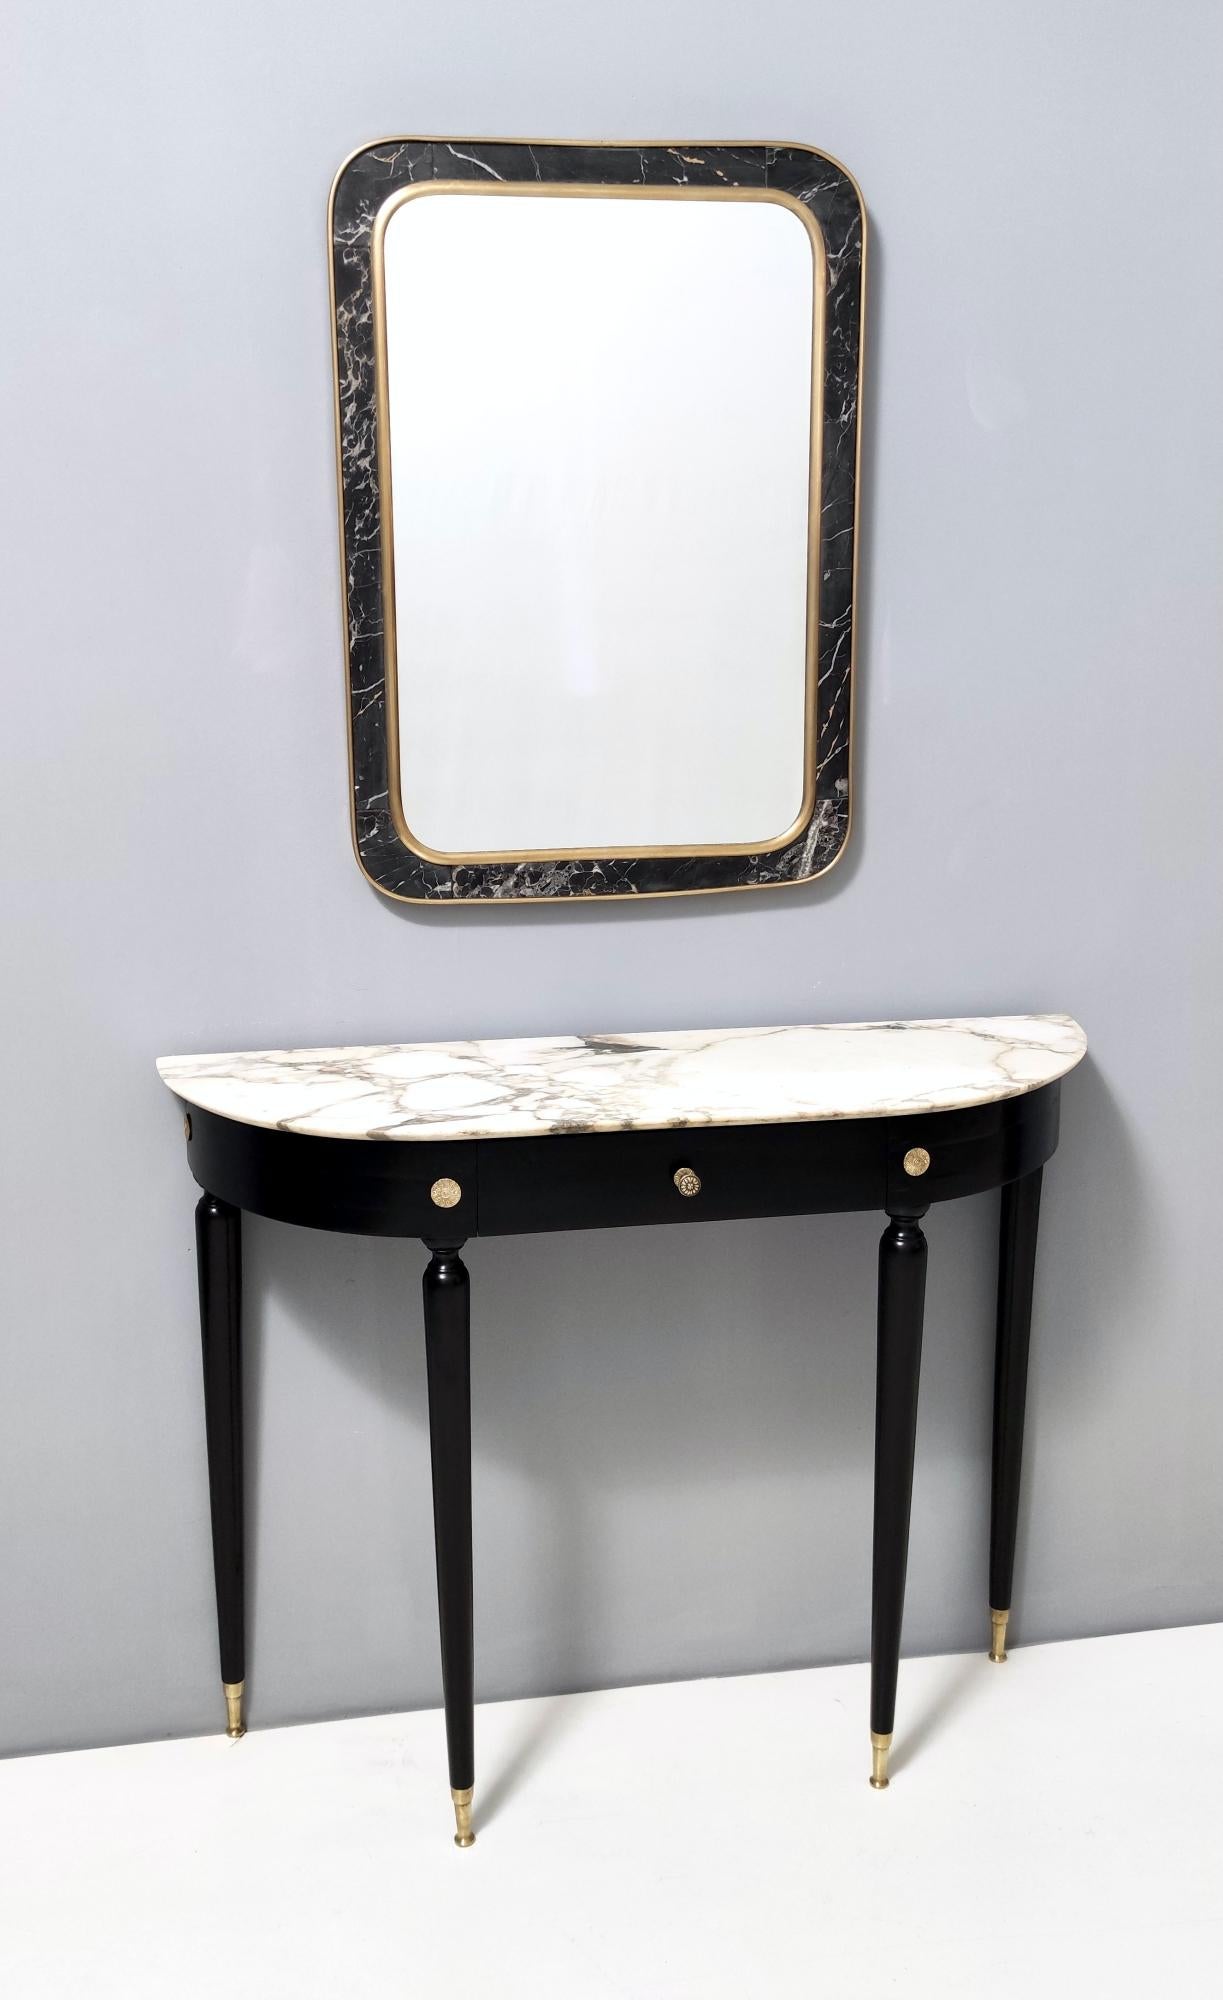 Italy, 1960s.
This mirror features a brass and black Portoro marble frame. 
It is a vintage piece, therefore it might show slight traces of use, but it can be considered as in excellent original condition and ready to become a piece in a home.